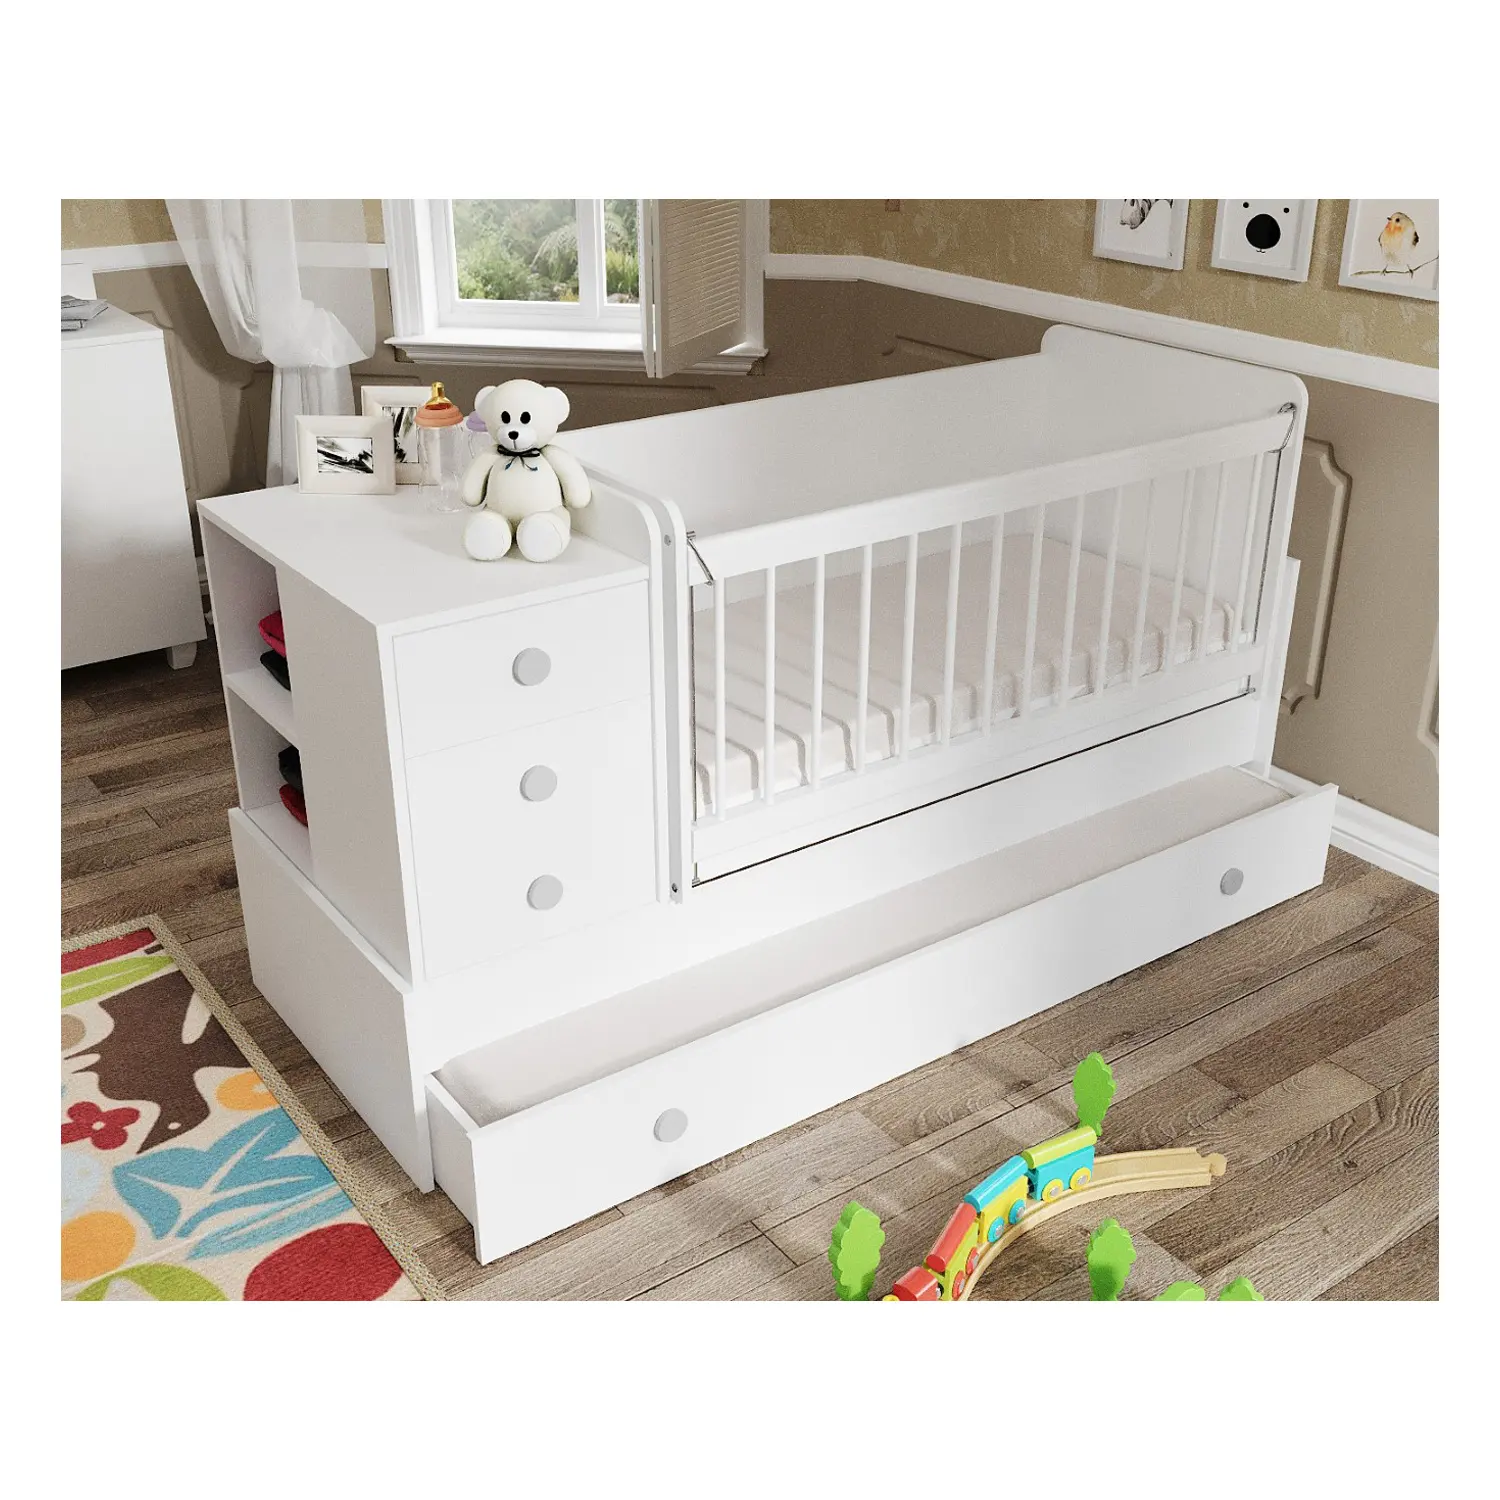 %100 MDF Pearl Convertible Baby Cradle -All in One Furniture it can be Turn into Study Desk, Dresser, Twin Bed